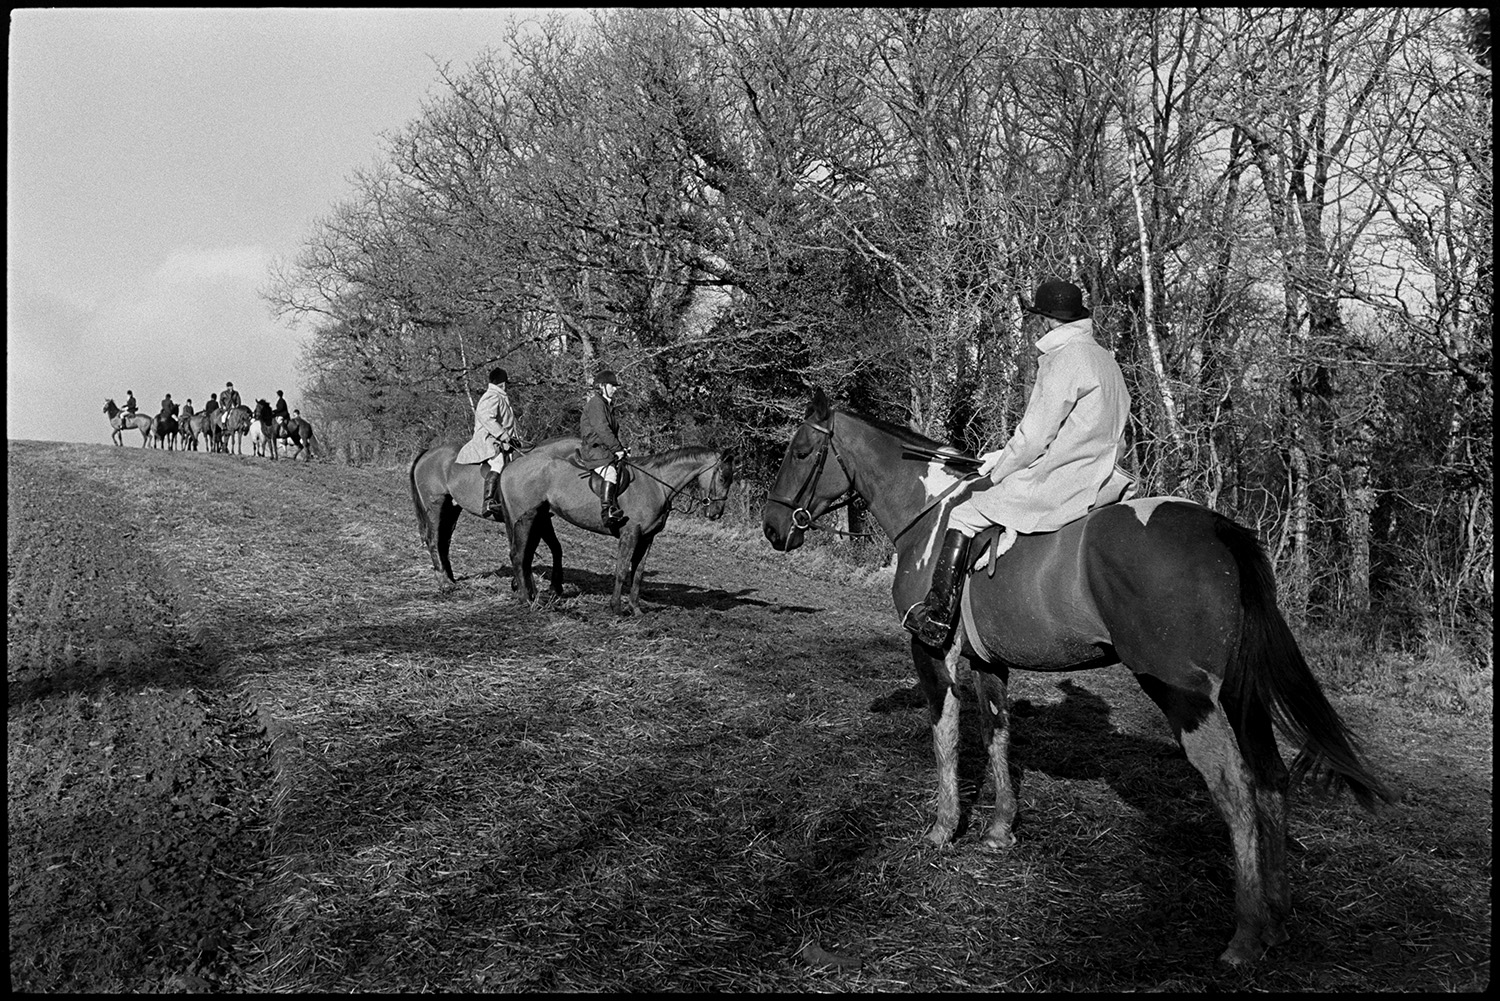 Hunt in ploughed field and wood. 
[Huntsmen on horseback at the edge of a ploughed field in Petrockstowe on a hunt. Woodland can be seen behind the field.]